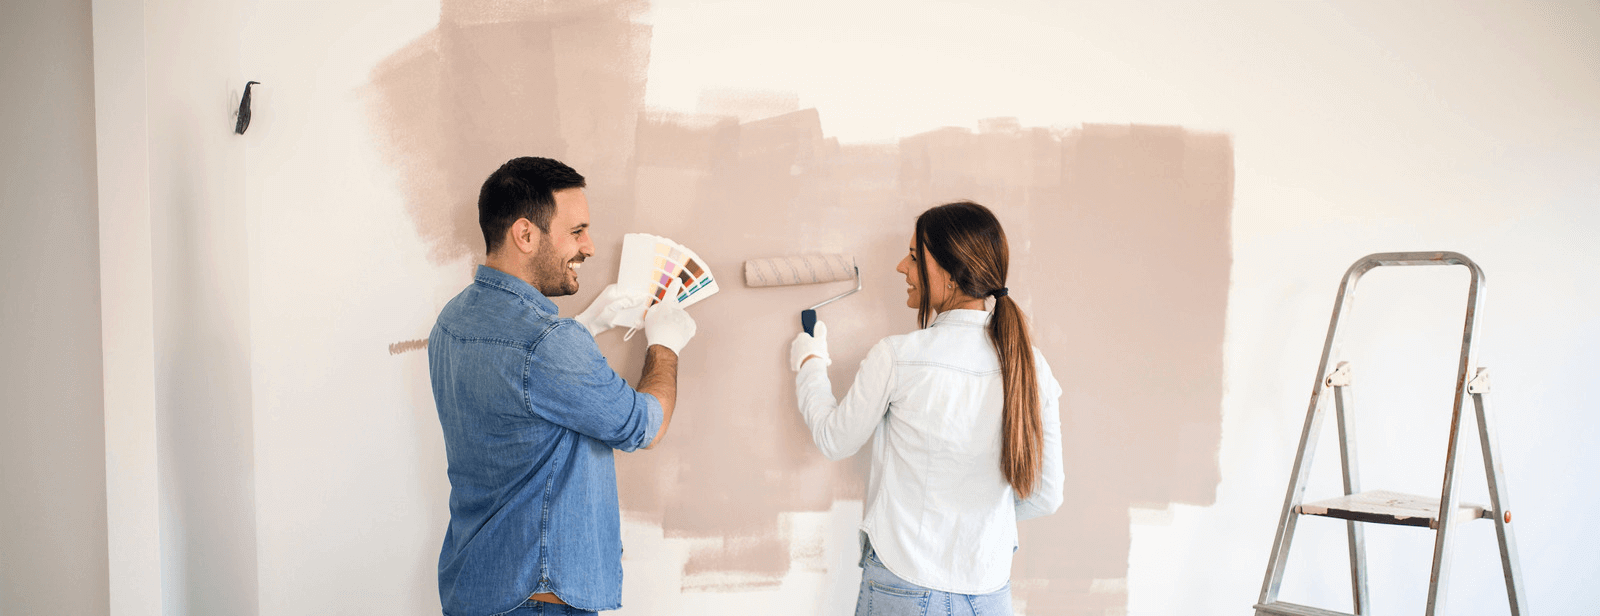 A couple painting their white walls a nude pink shade with rollers.